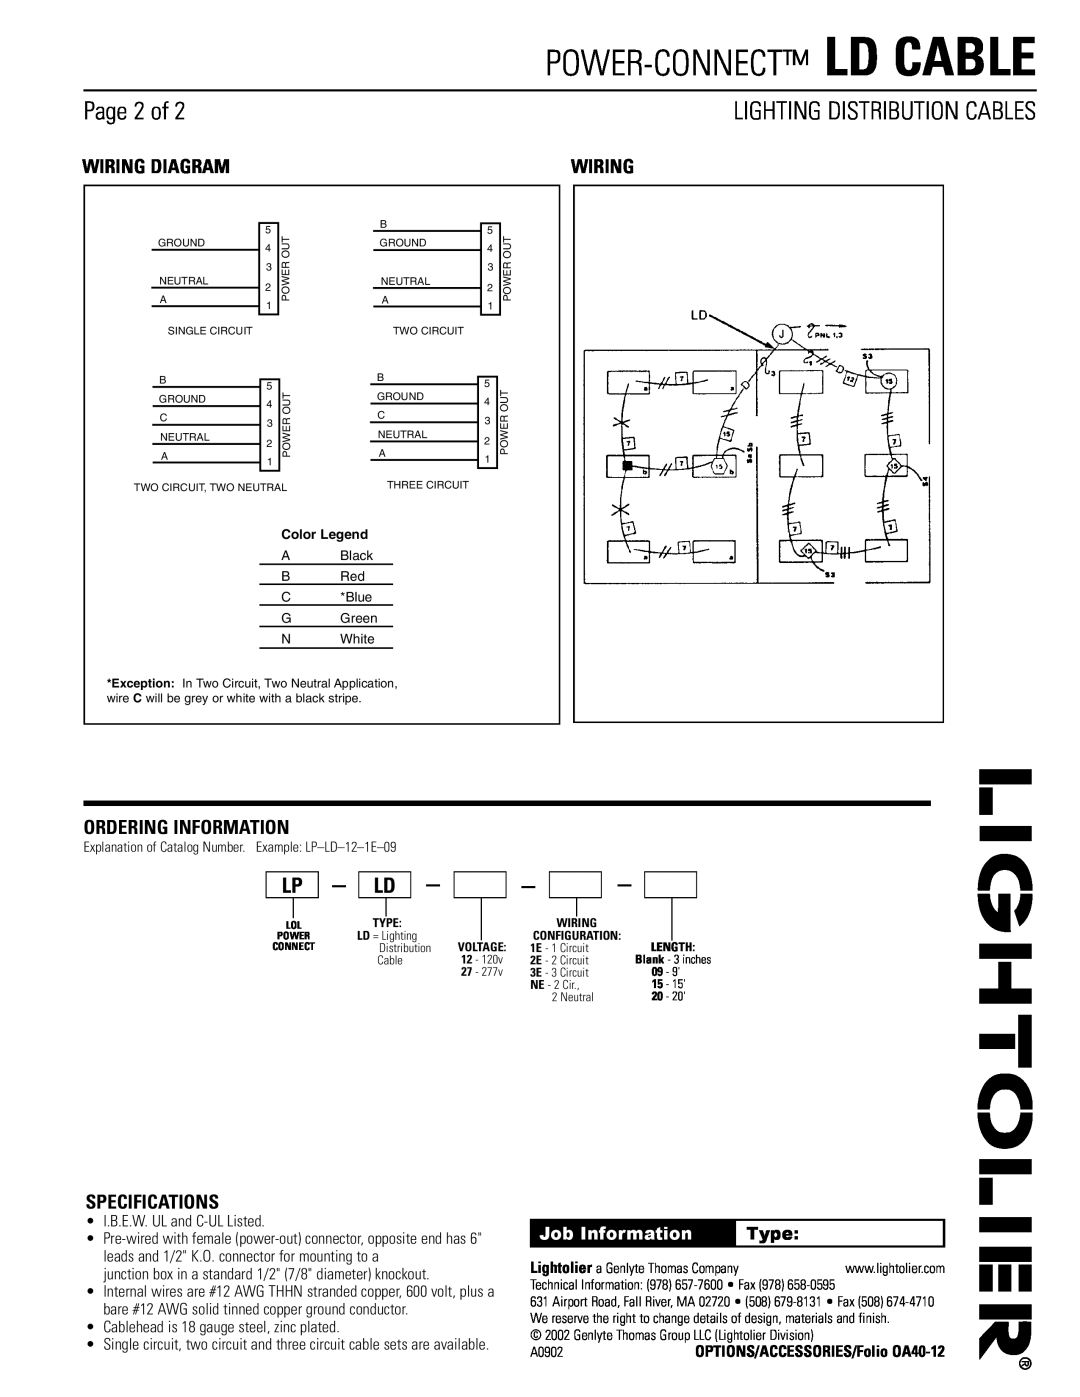 Lightolier LD Cable Page 2 of, Lighting Distribution Cables, Wiring Diagram, Ordering Information, Specifications, Type 